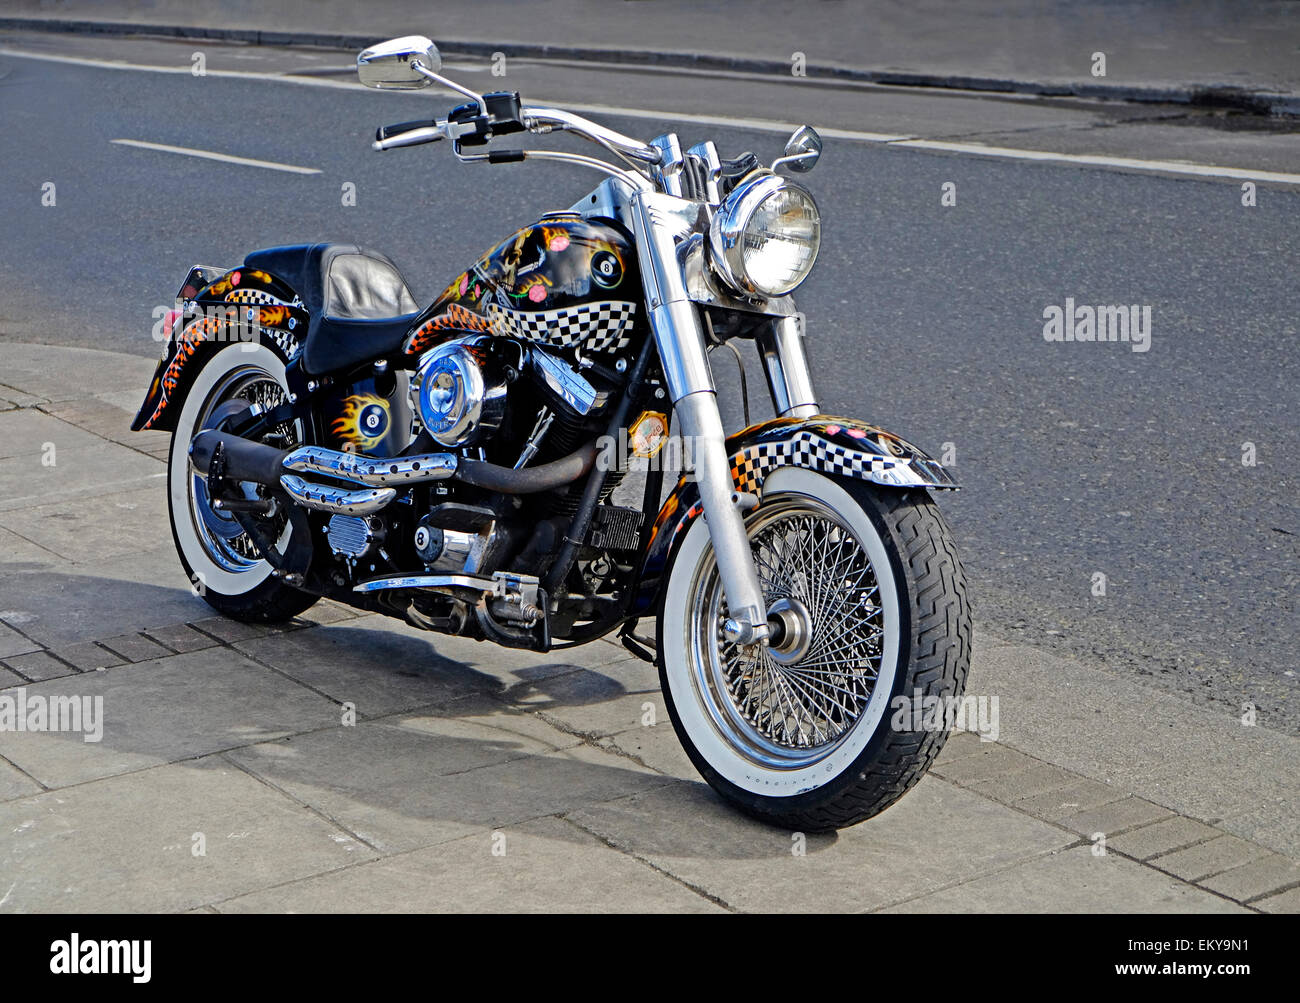 heavily customized and illustrated Harley davidson Motorcycle parked on a Dublin street.Ireland Stock Photo